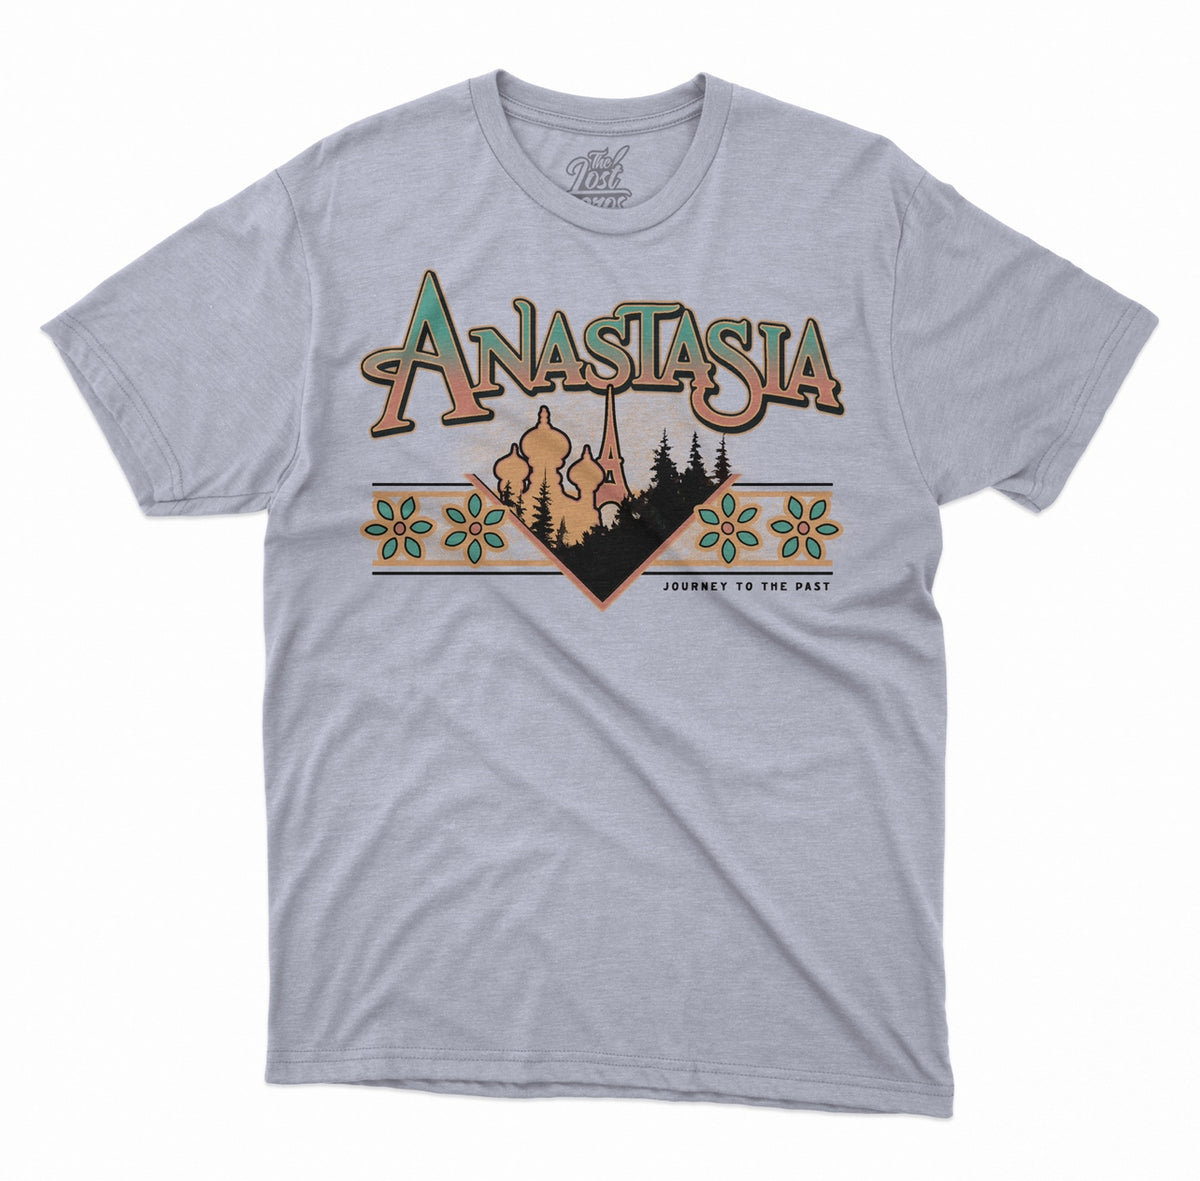 Journey to the Past Tee